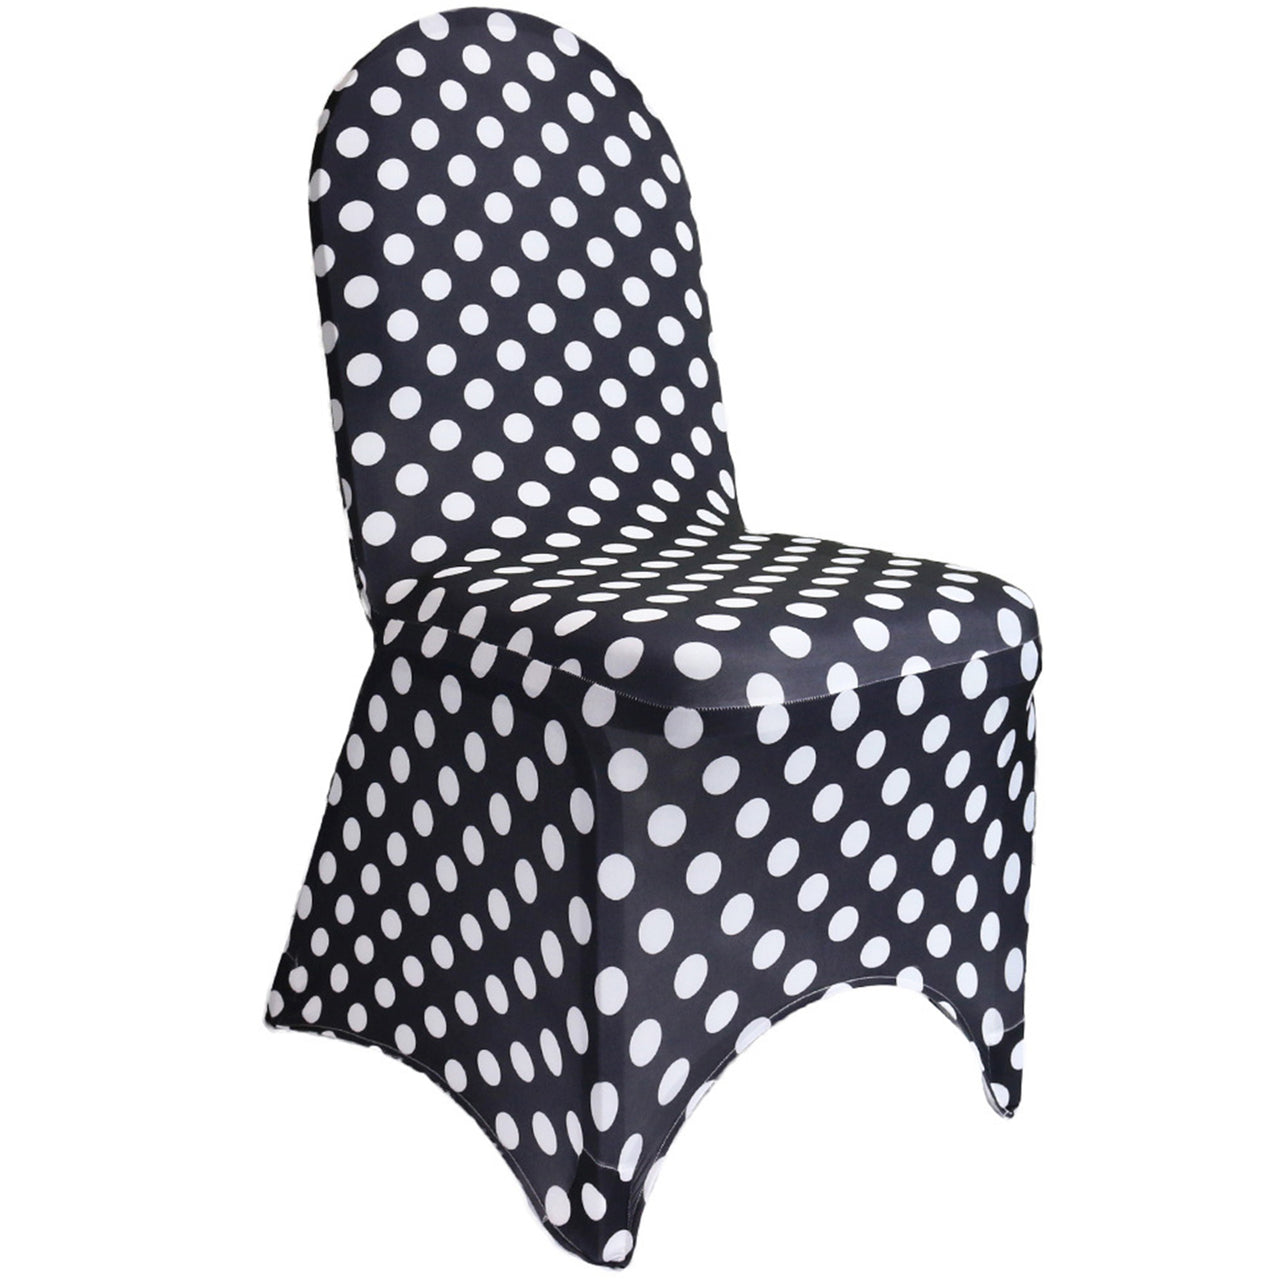 Stretch Spandex Folding Chair Covers Black and White Polka Dot